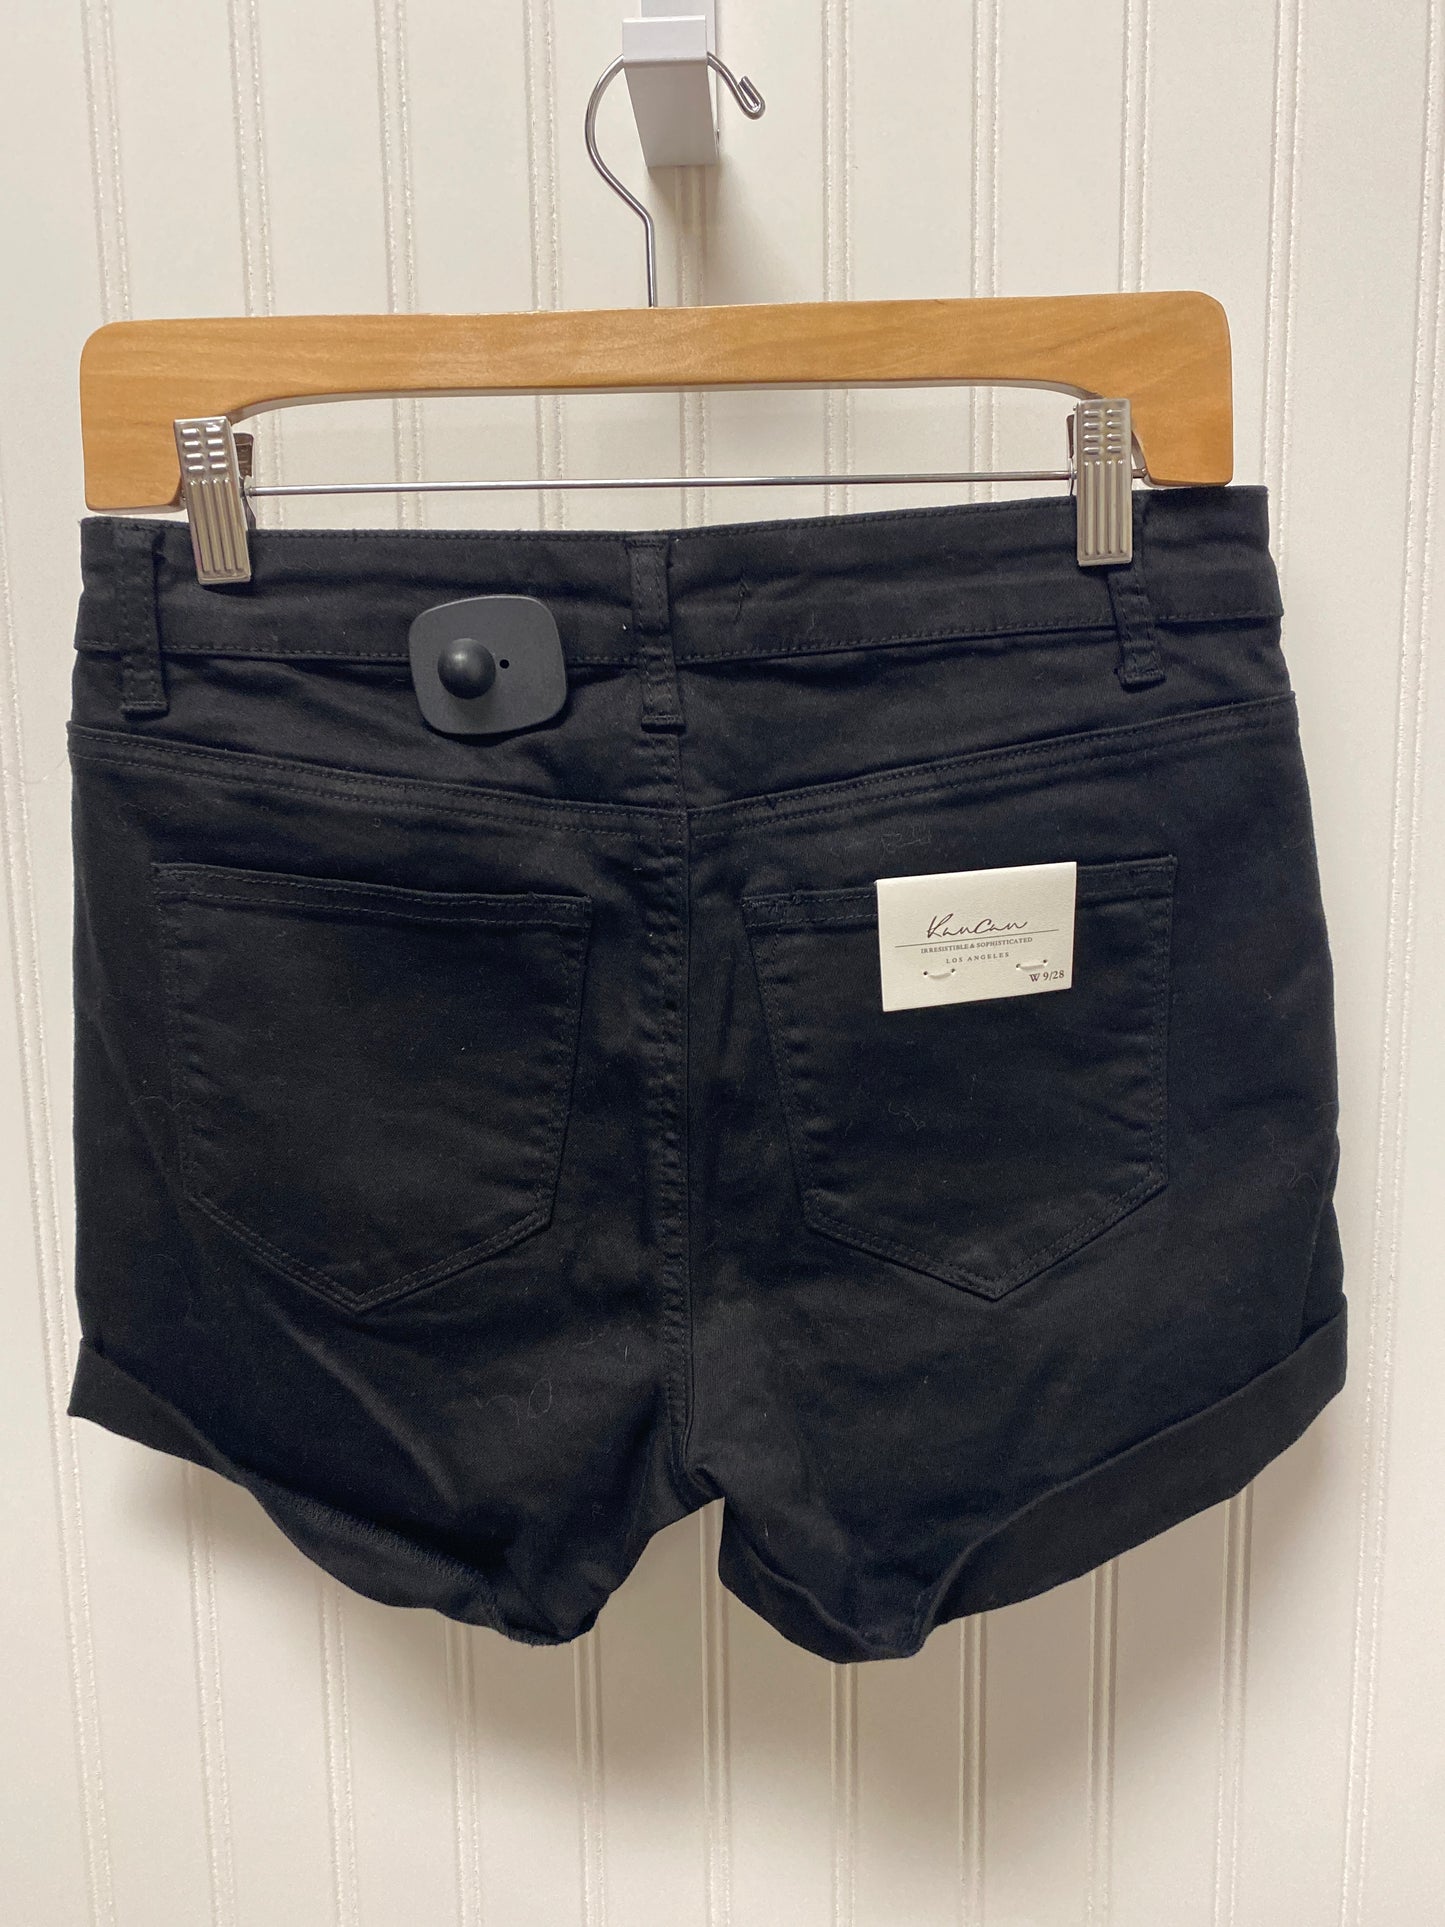 Shorts By Kancan  Size: 6